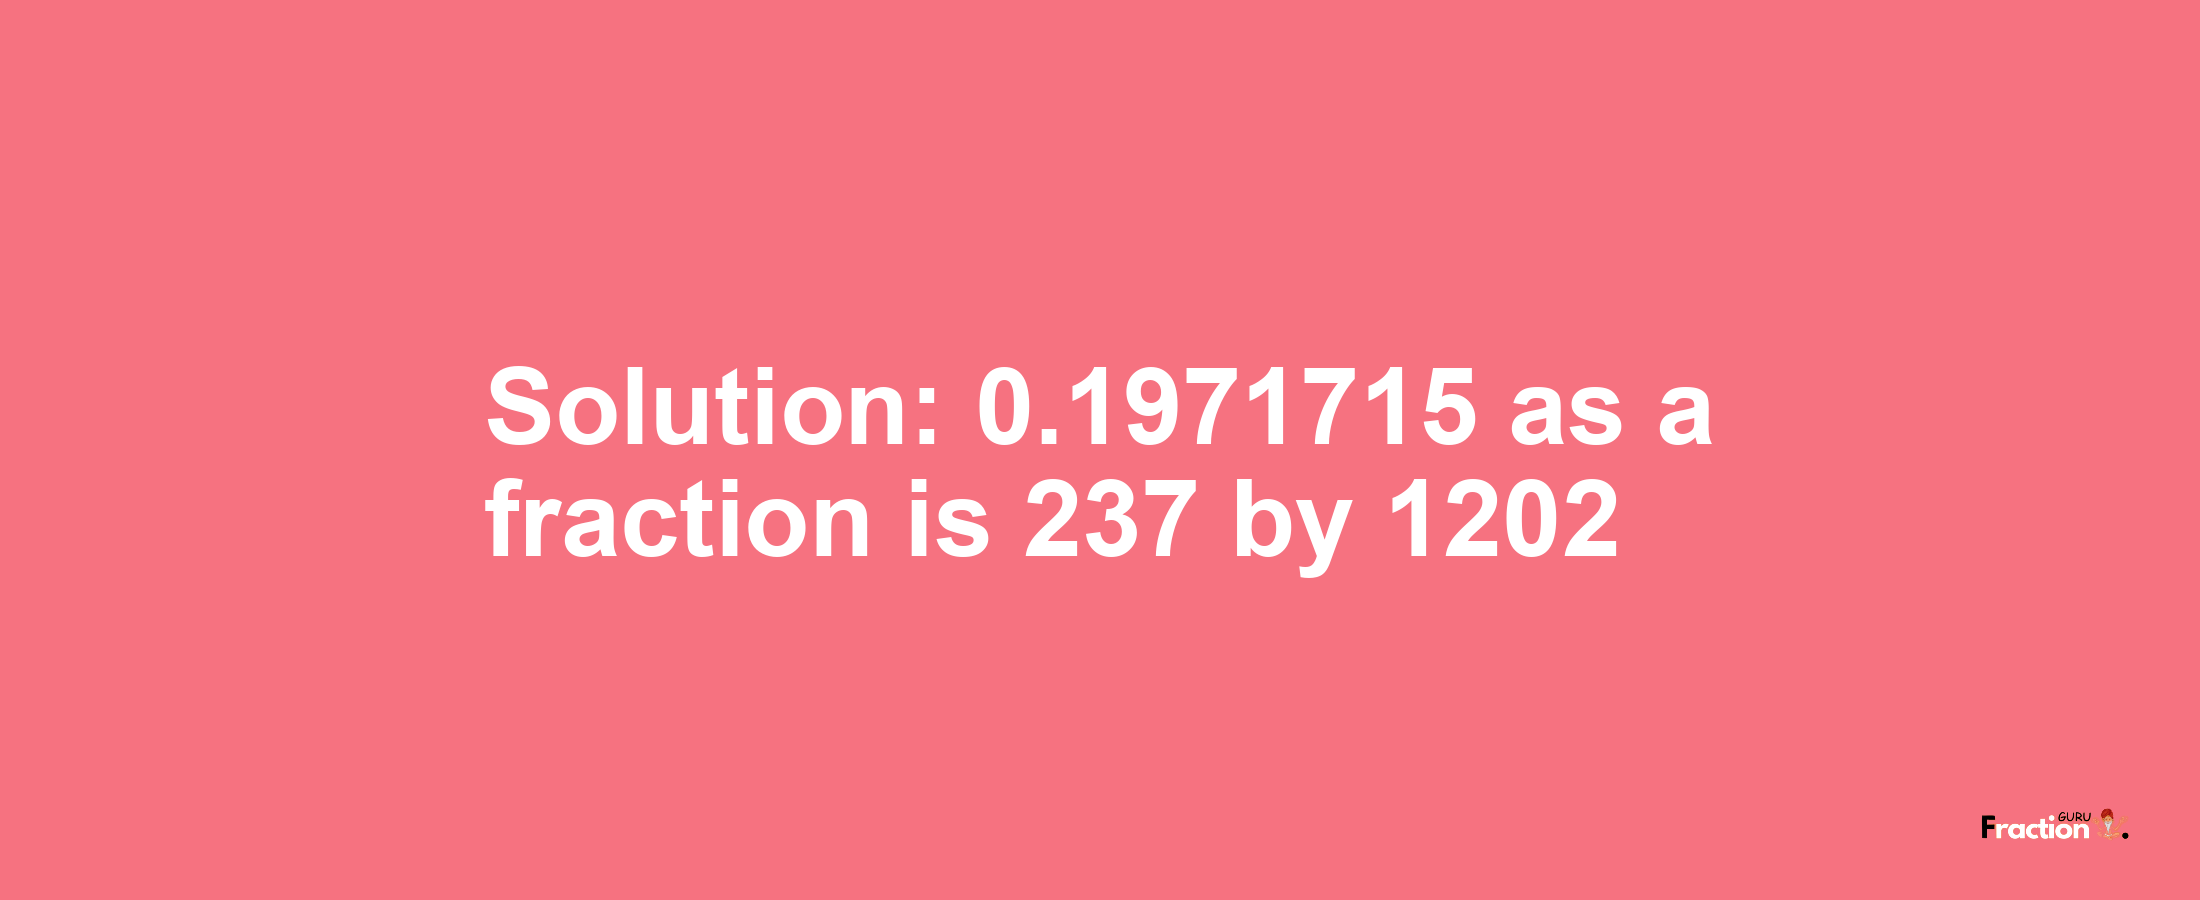 Solution:0.1971715 as a fraction is 237/1202